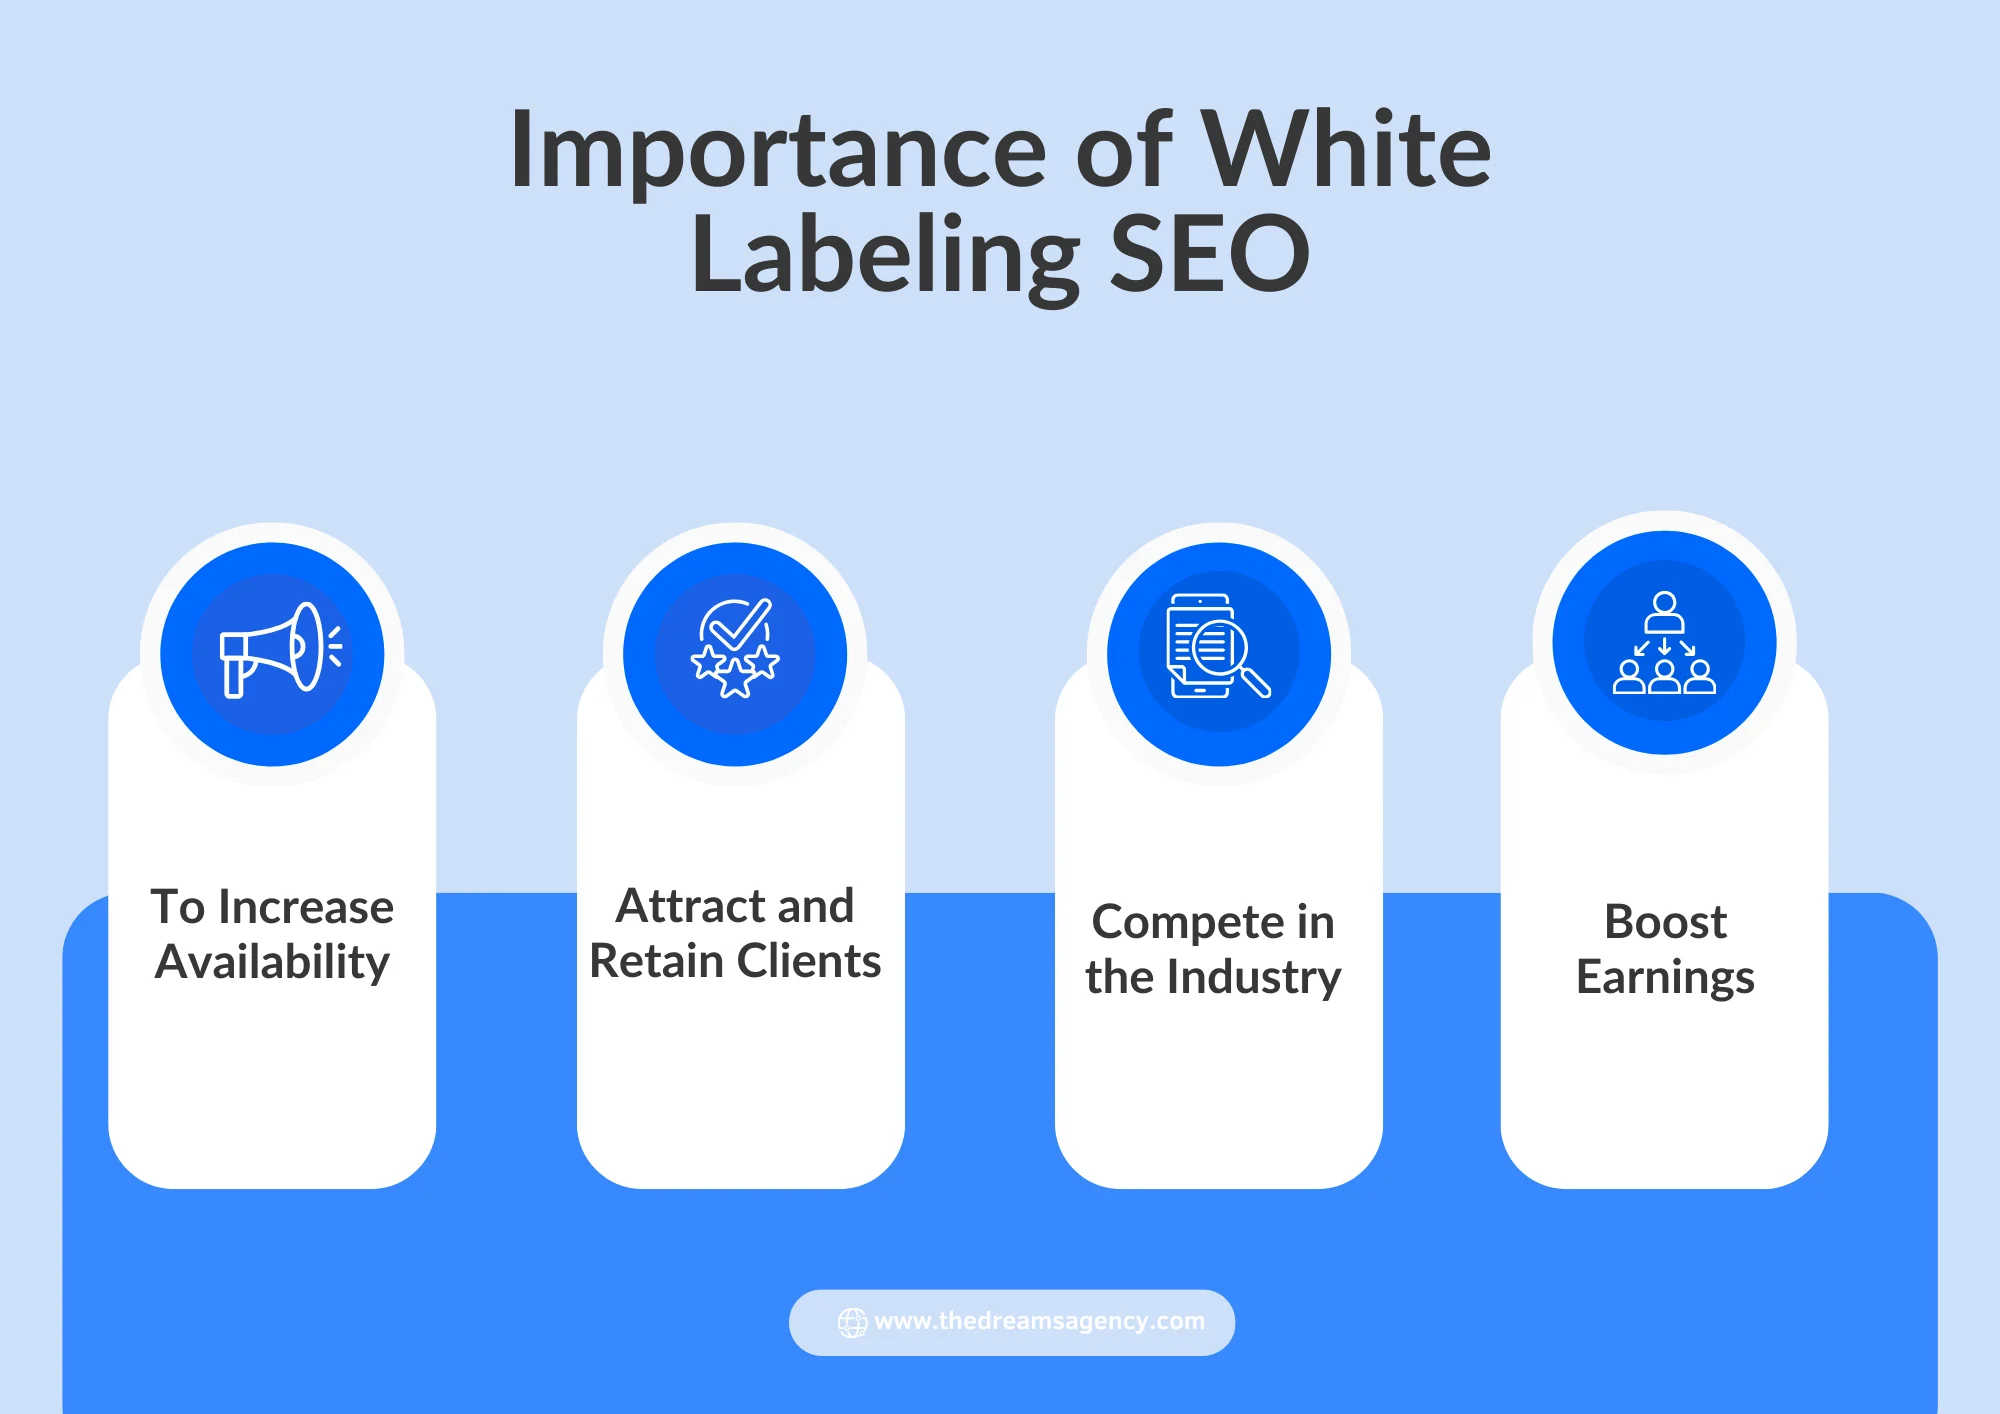 An infographic on the importance of white labeling seo